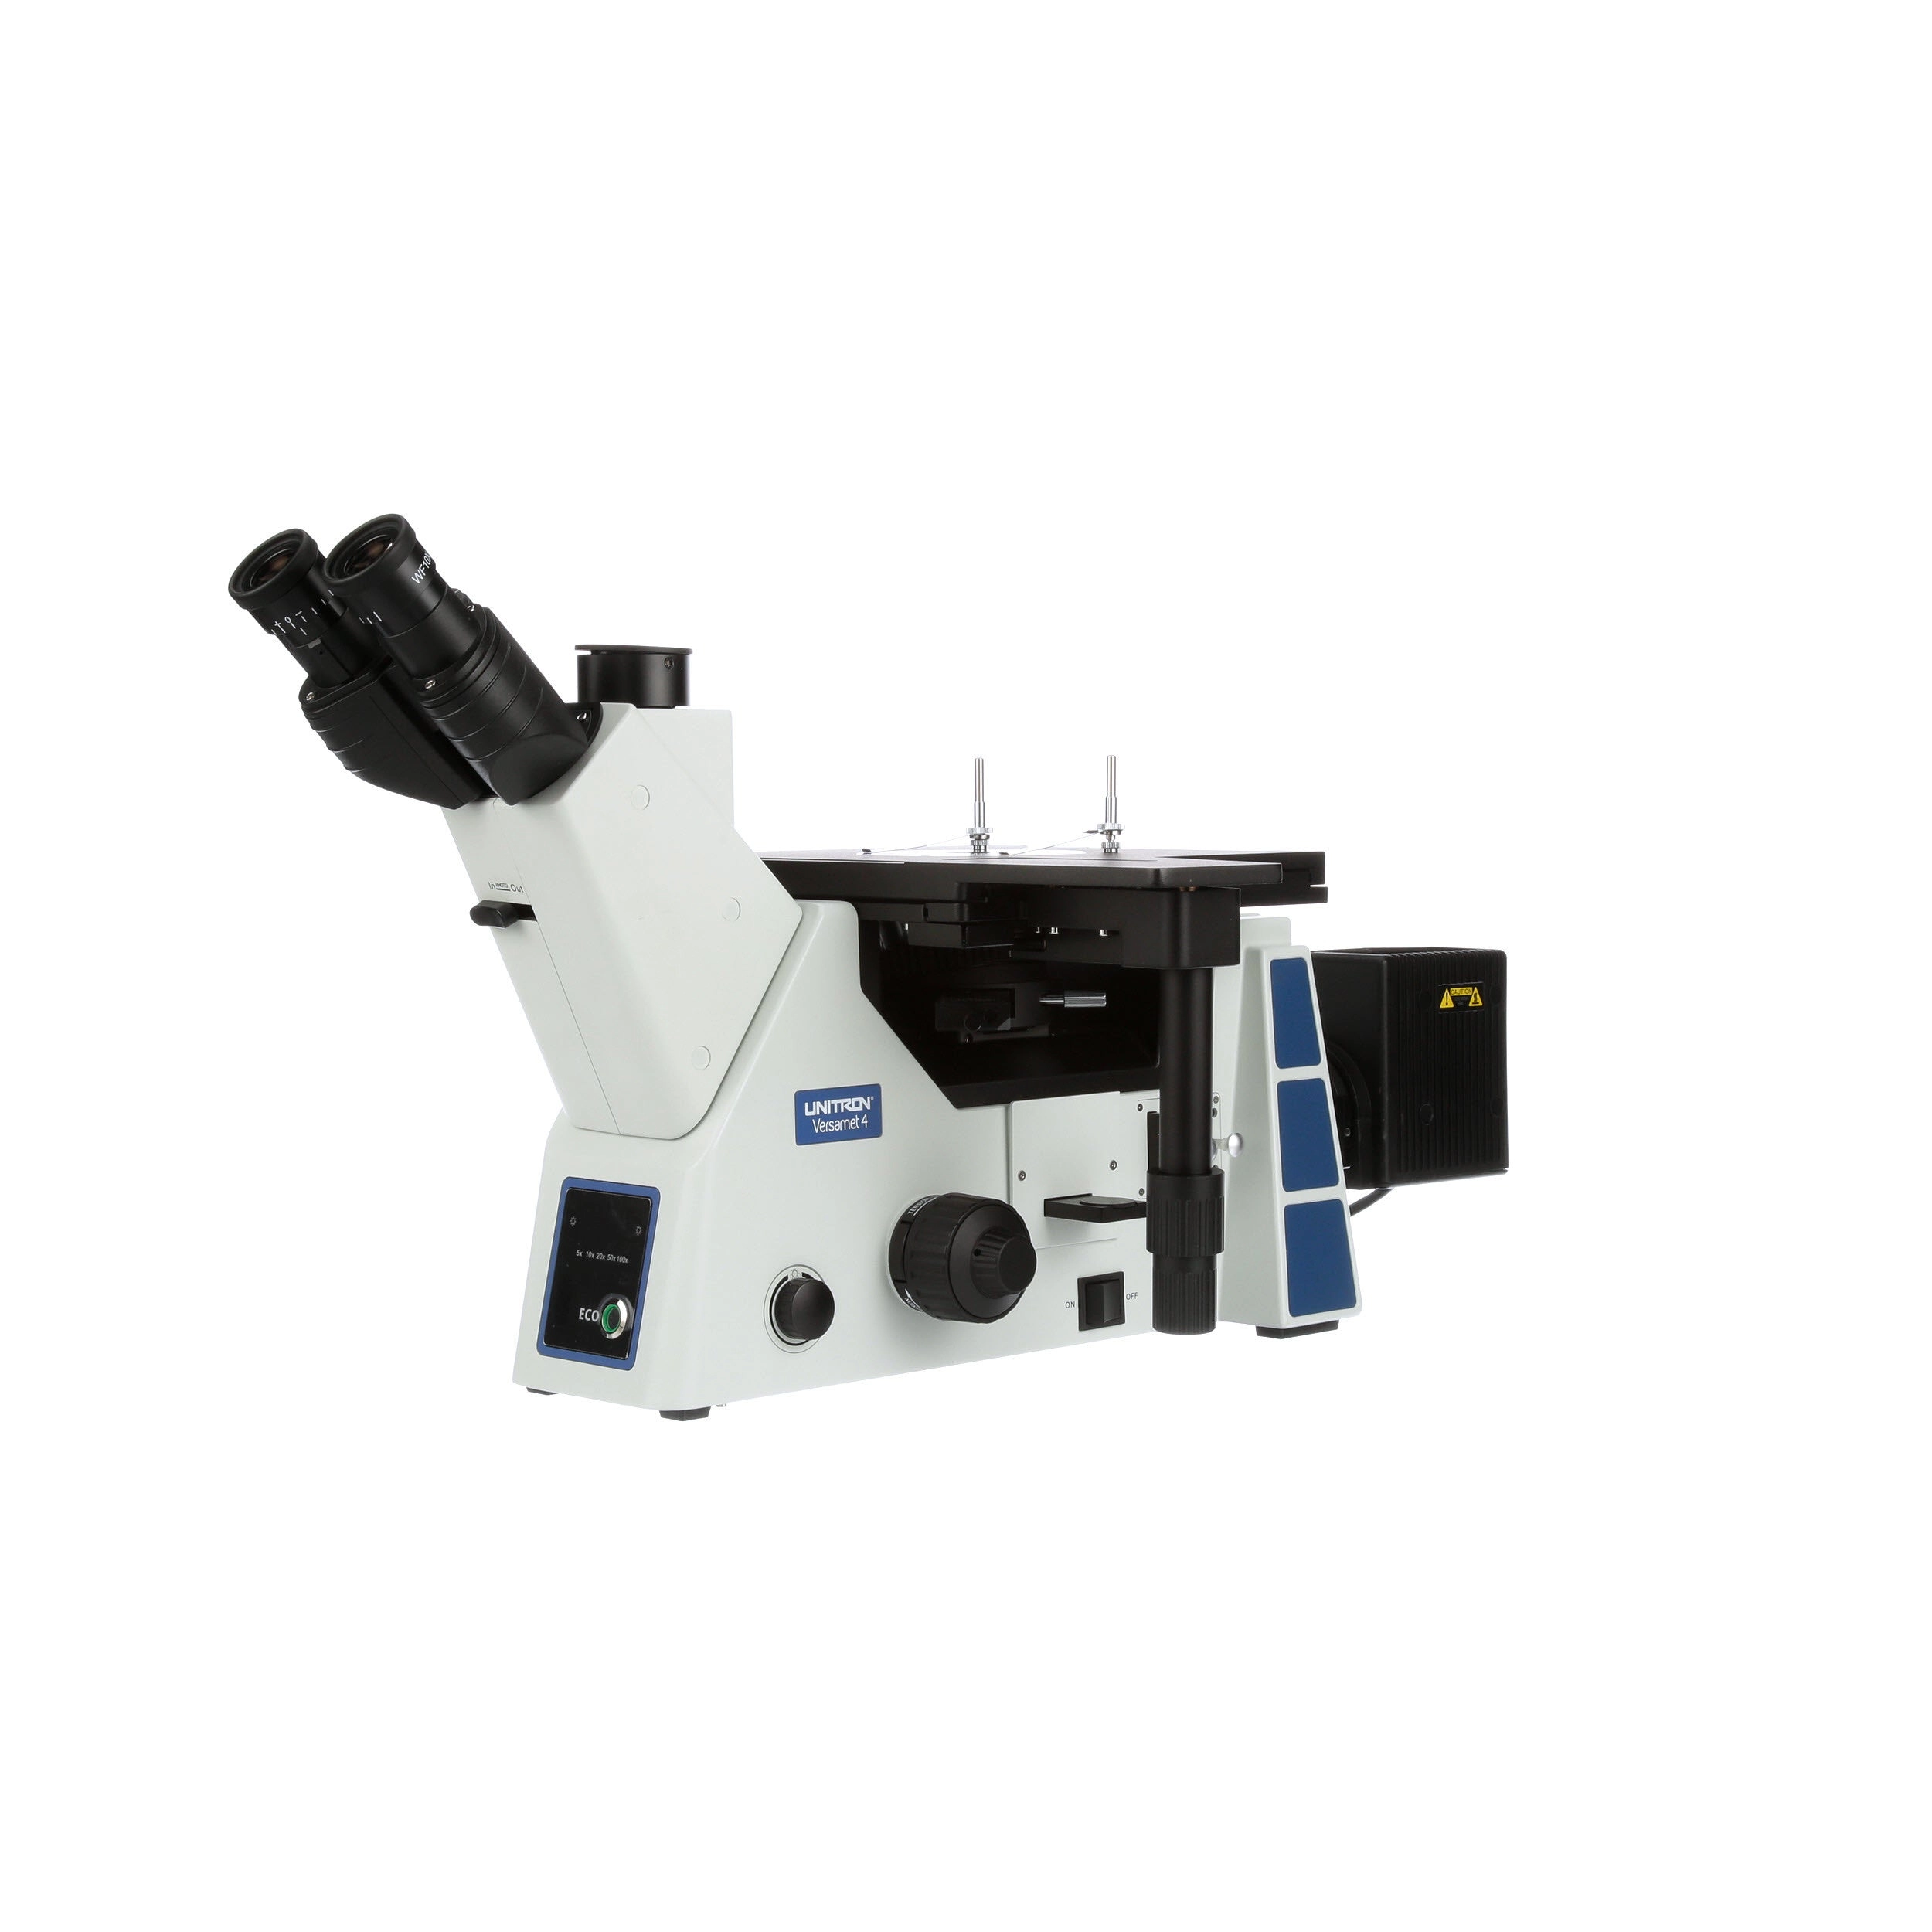 Unitron Versamet 4 Inverted Metallurgical Microscope - With BF/DF Objectives